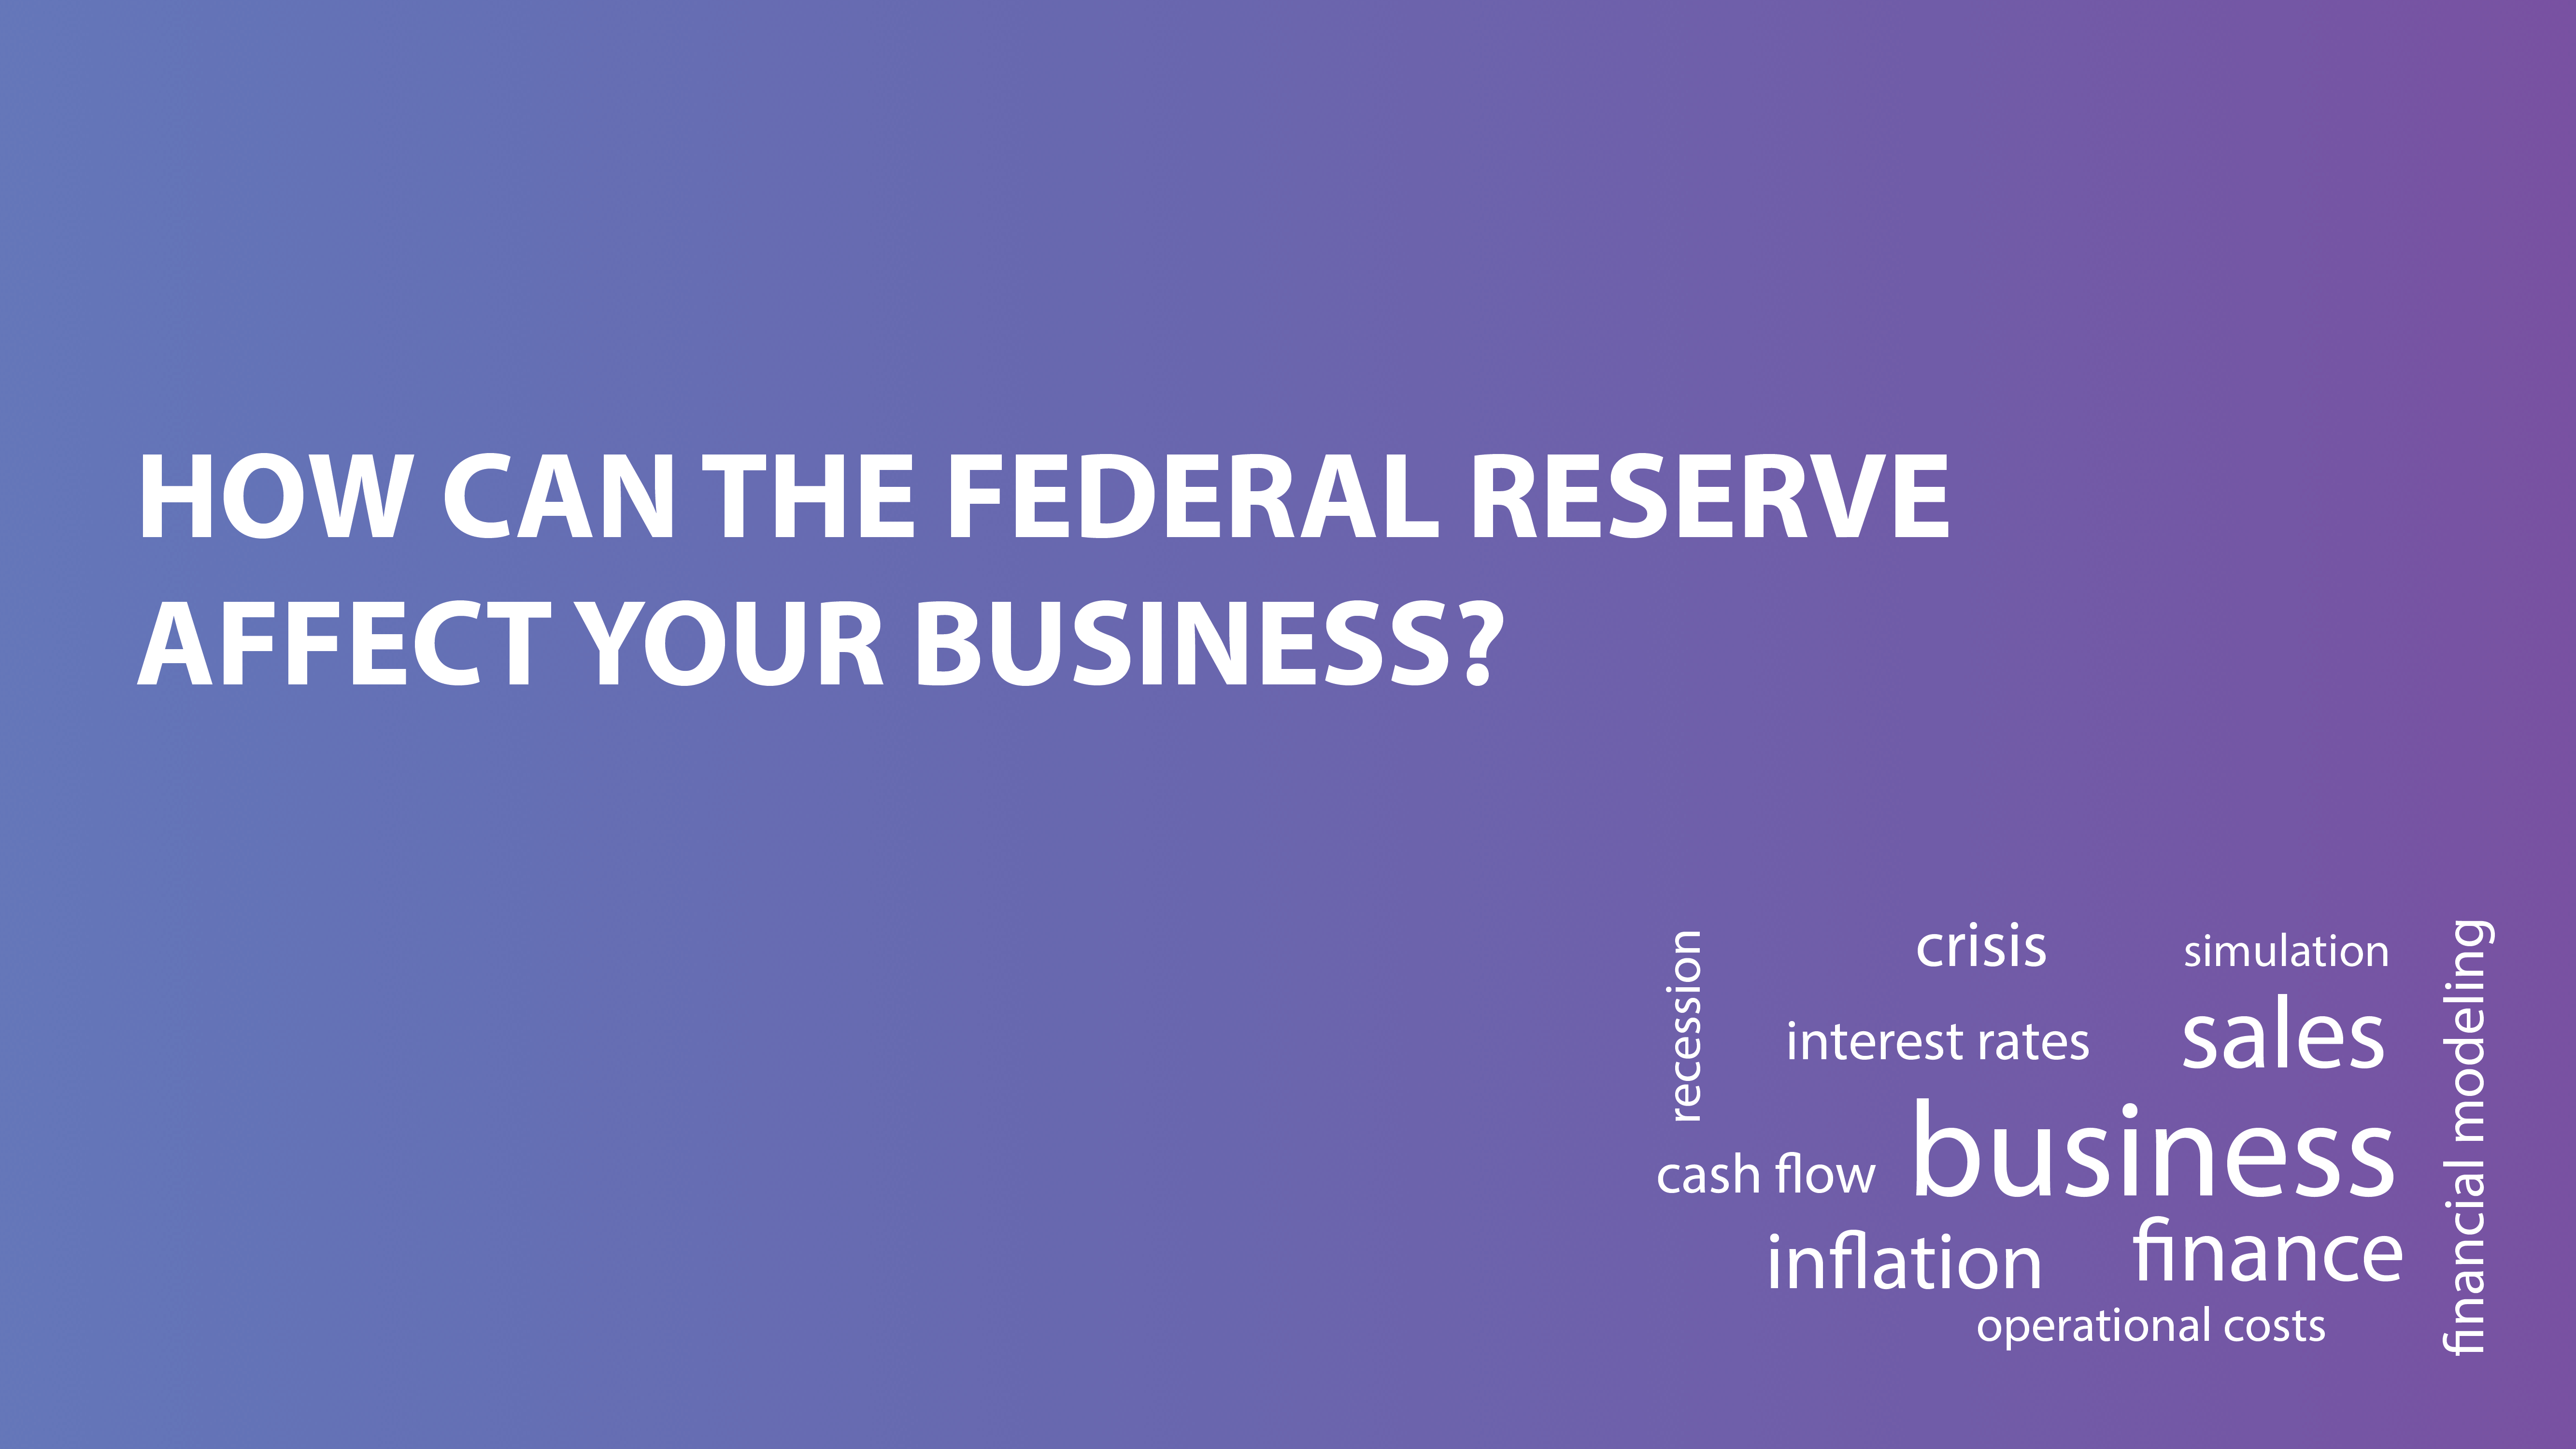 How Can the Federal Reserve Affect Your Business?